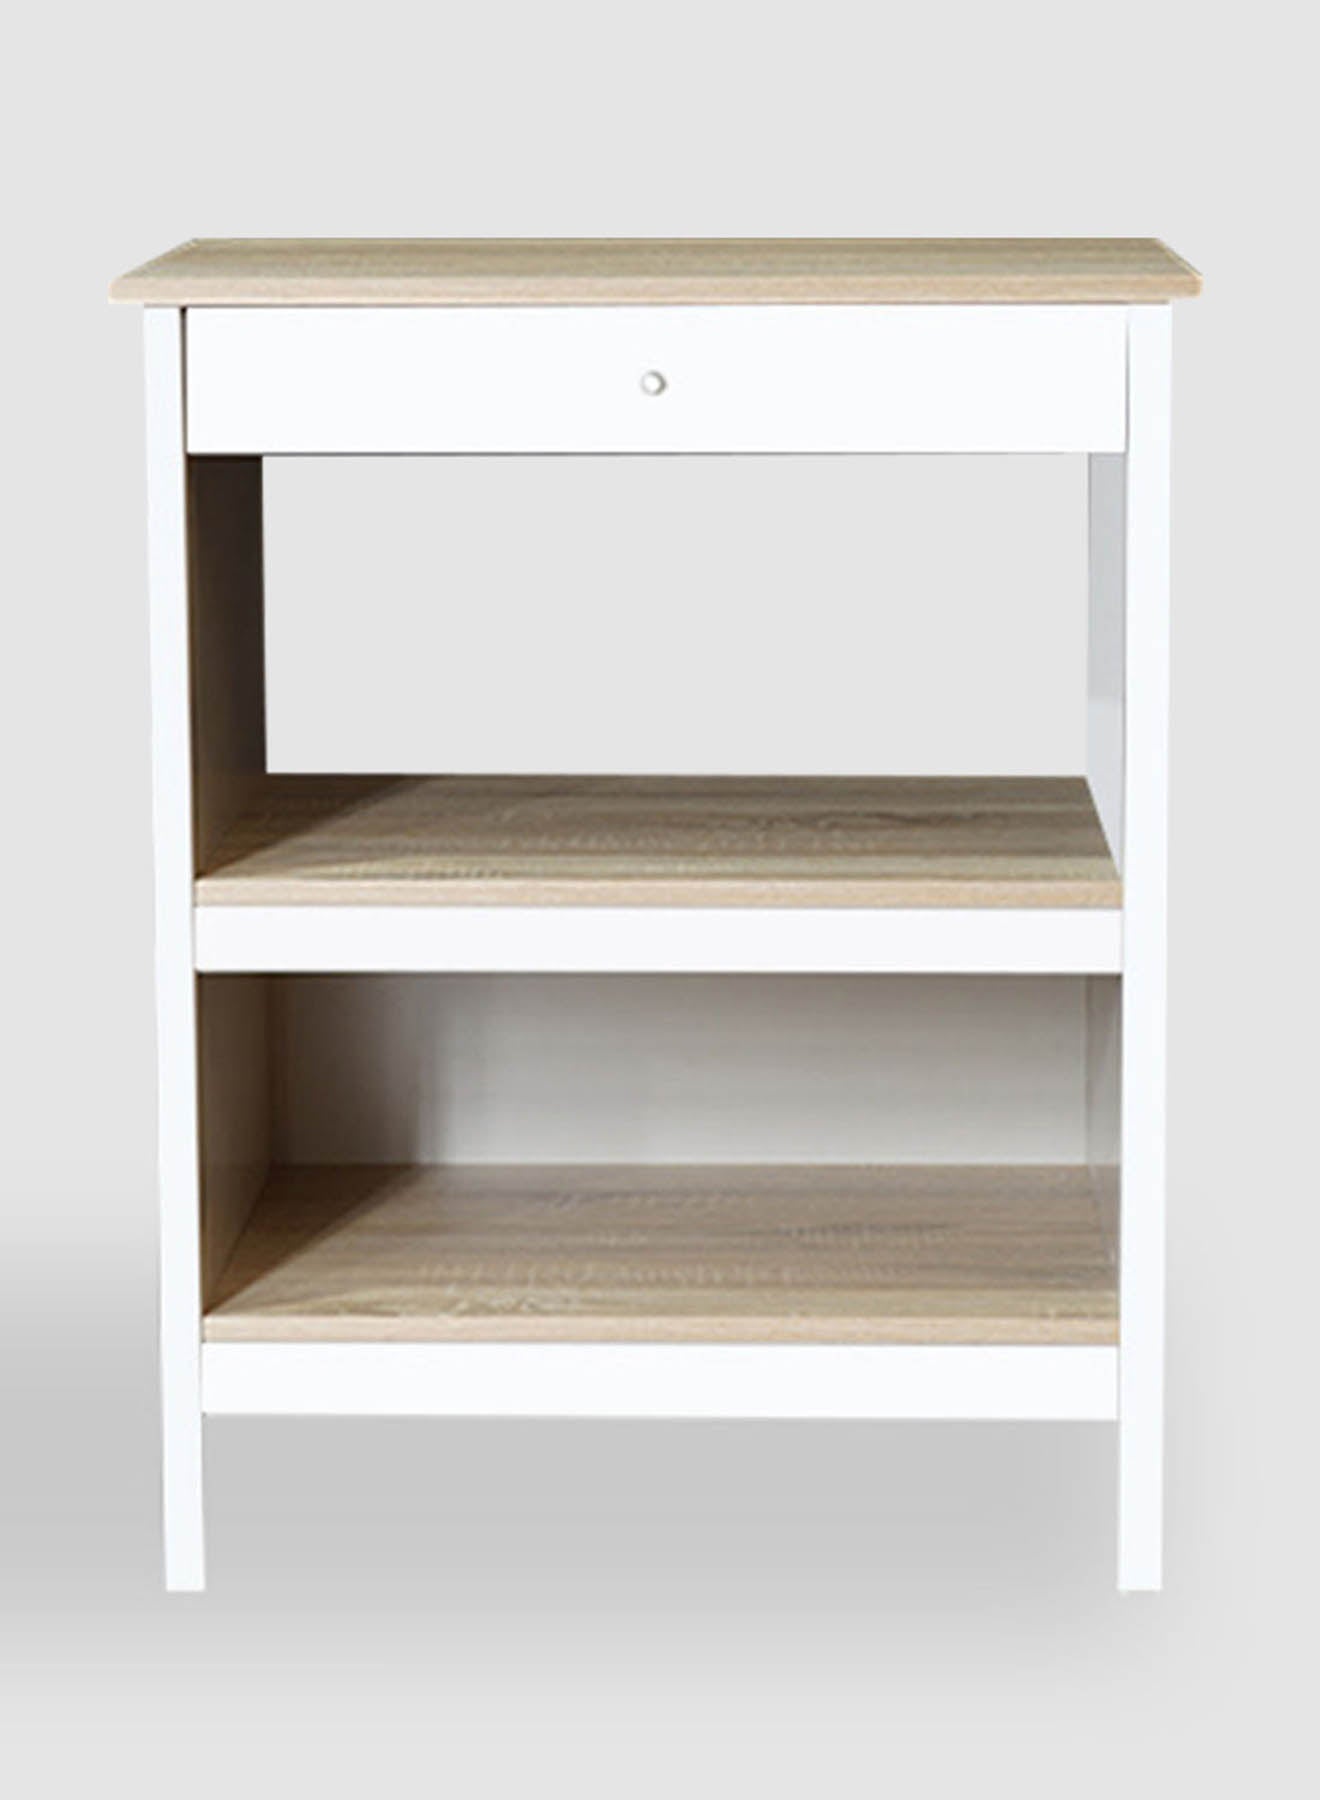 Buffet Table By In A White Color - Size 720 X 520 X 900 - Cabinet For Storage 